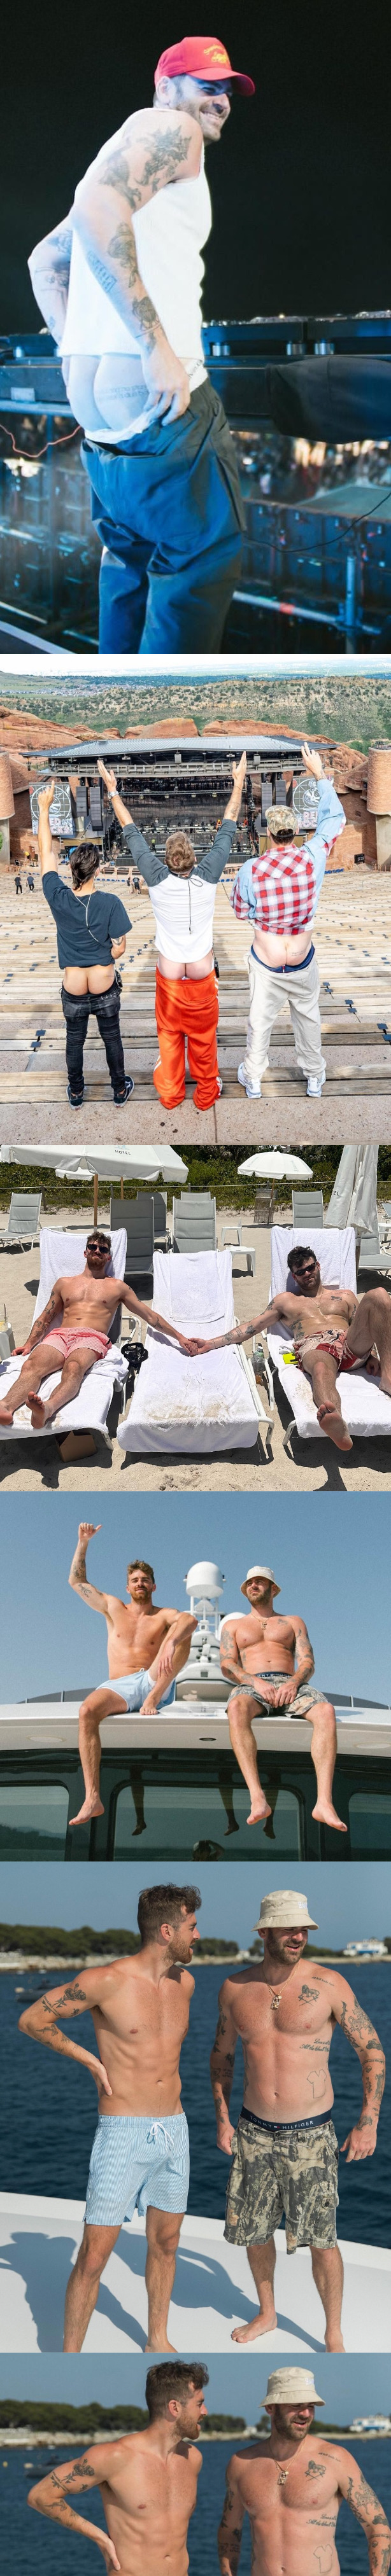 The Chainsmokers drop their trousers to show off their asses